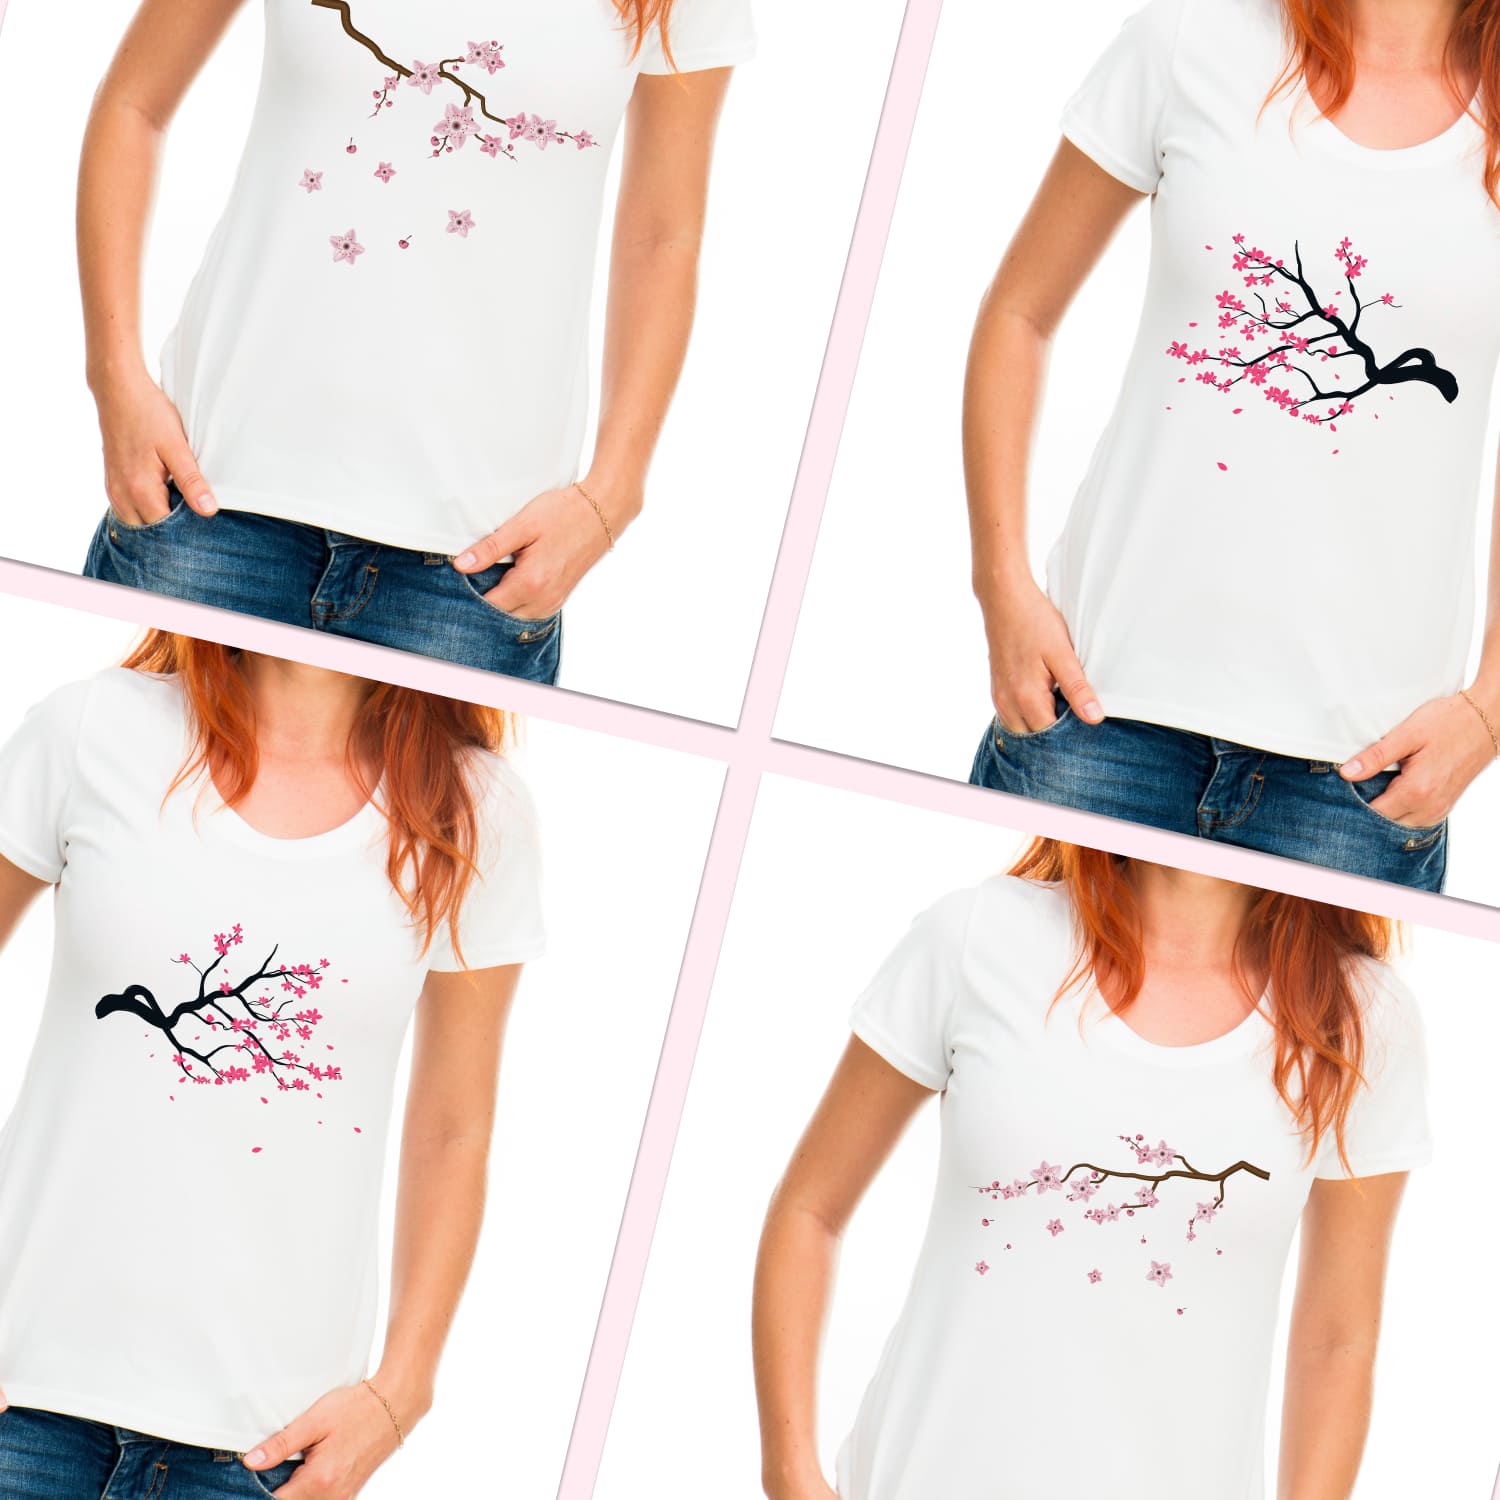 Images with cherry blossom branch t shirt designs.